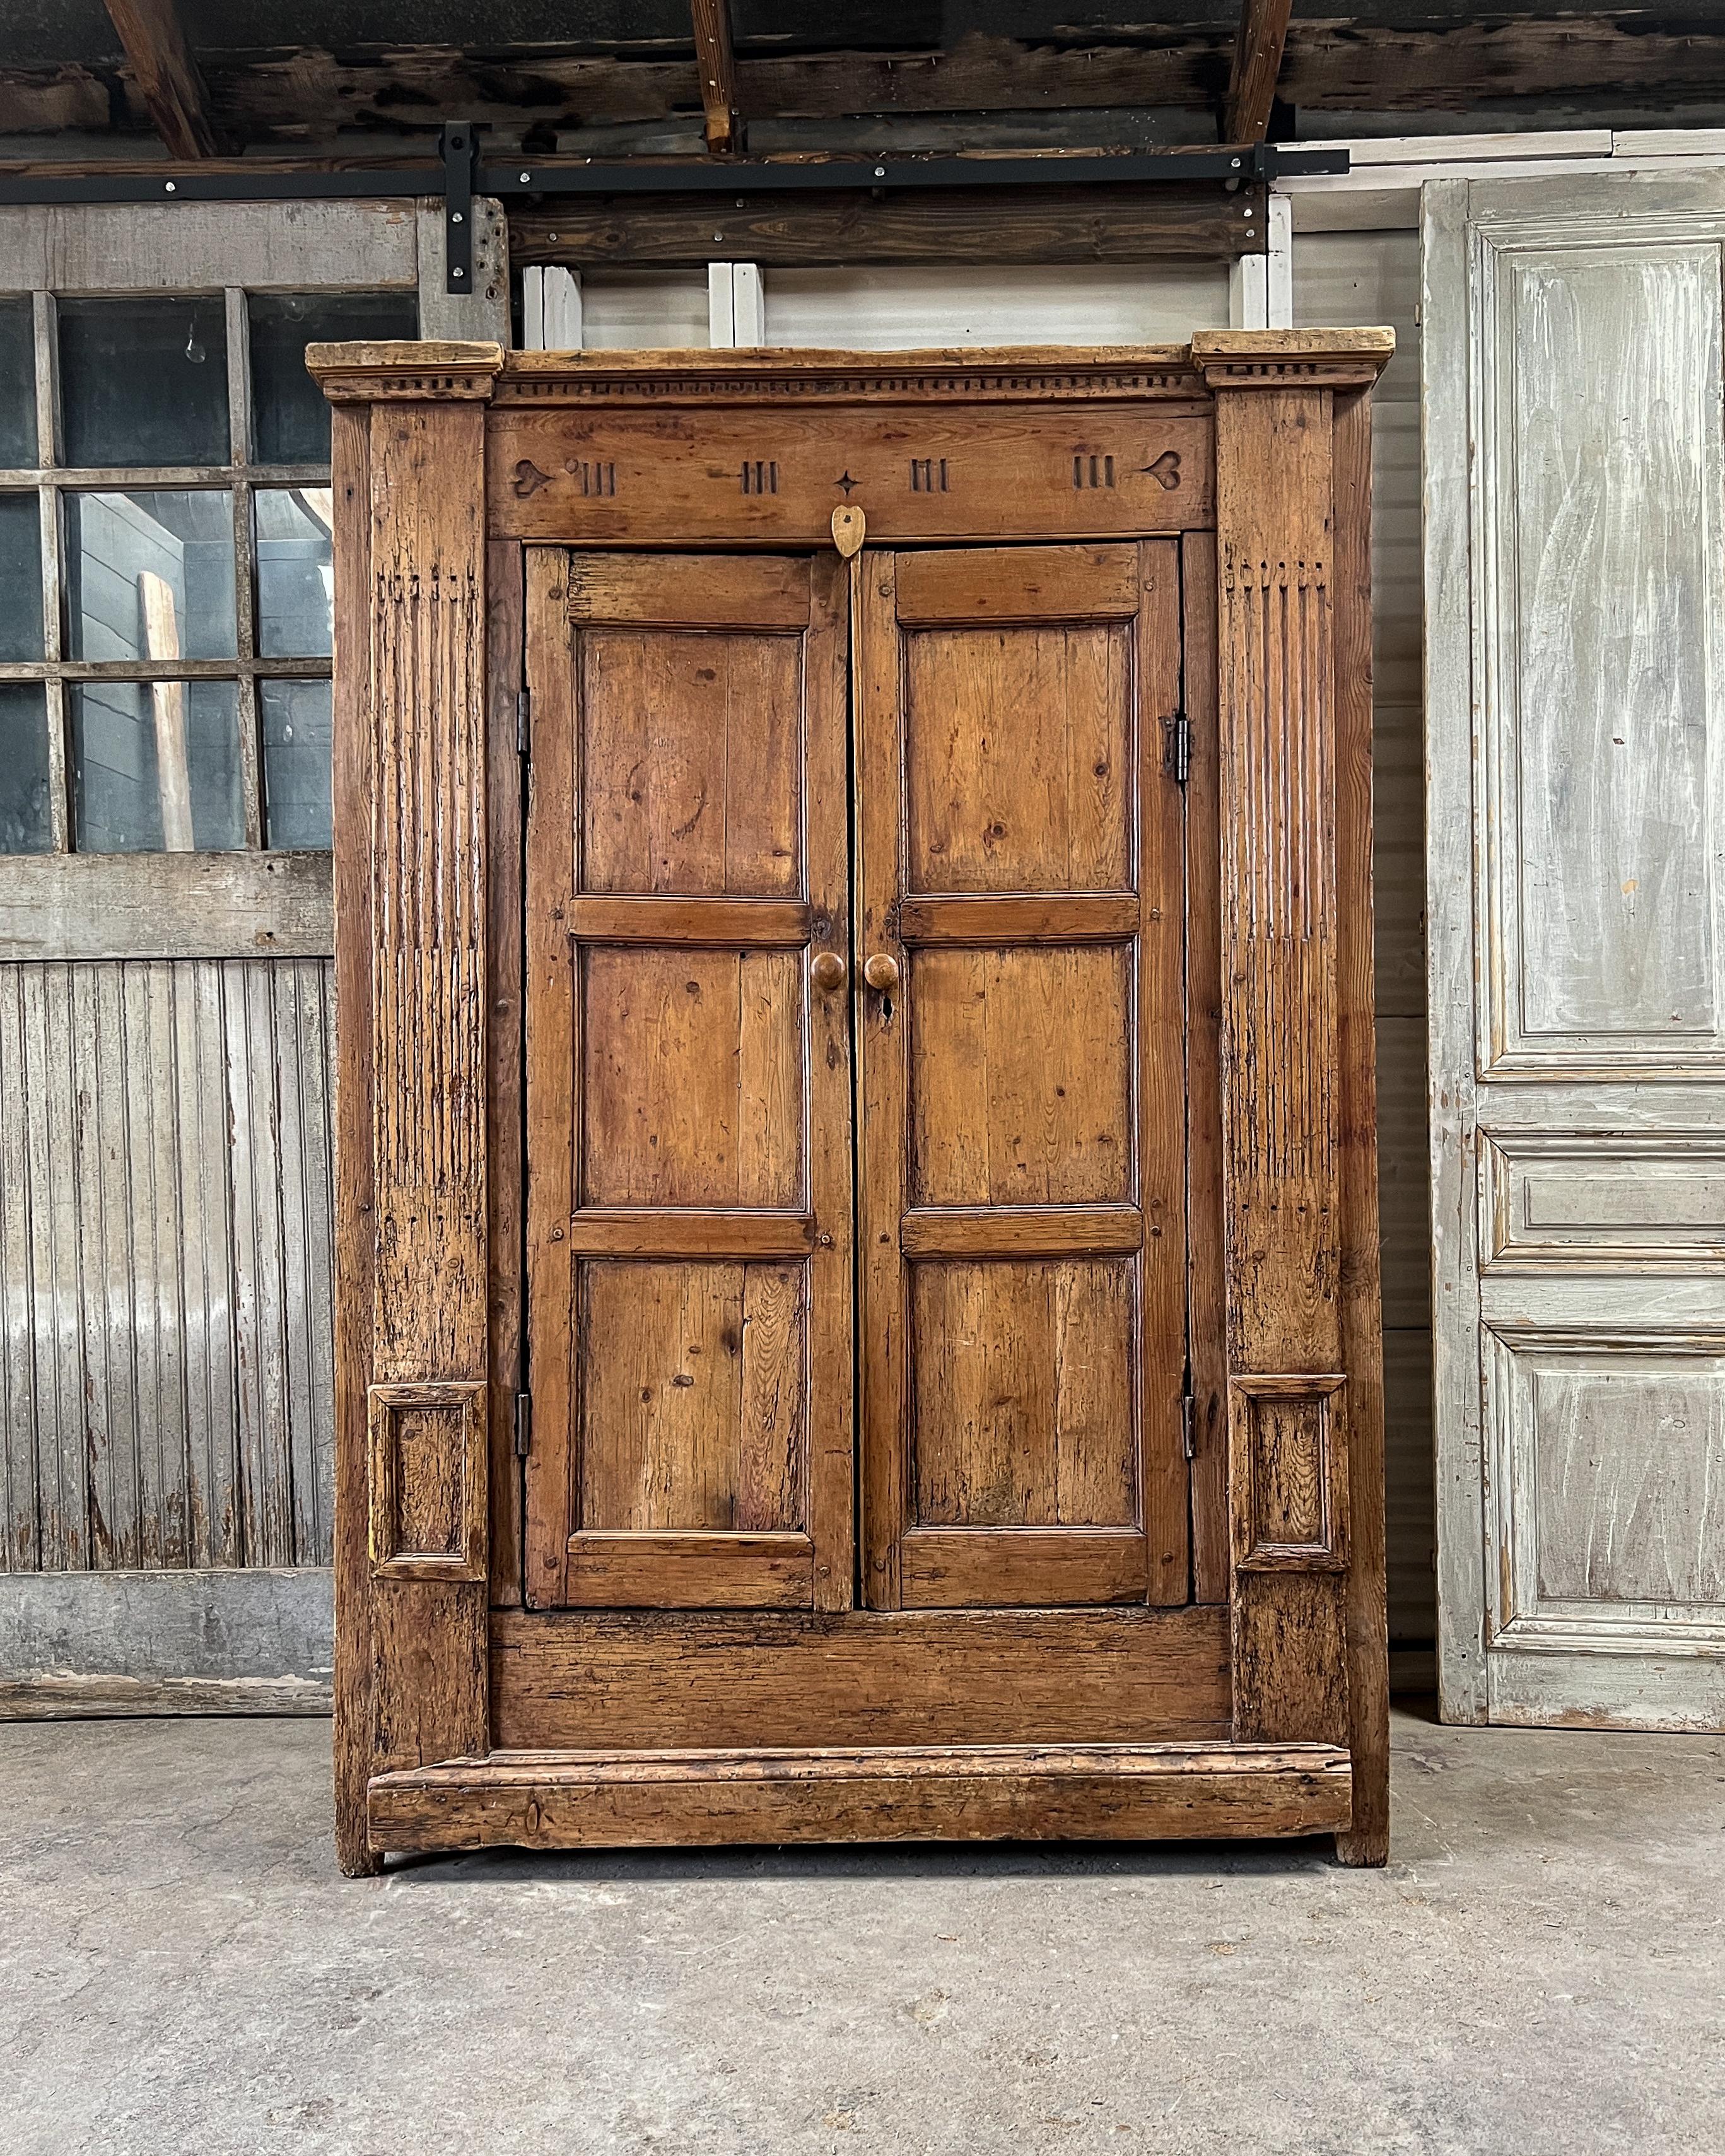 Large, authentic antique solid pine armoire found in The Netherlands. Dating to the late 18th century, the armoire is constructed utilizing pegged joinery. Hand-carved details on the front including dentil molding, hearts, fluted column-like panels,